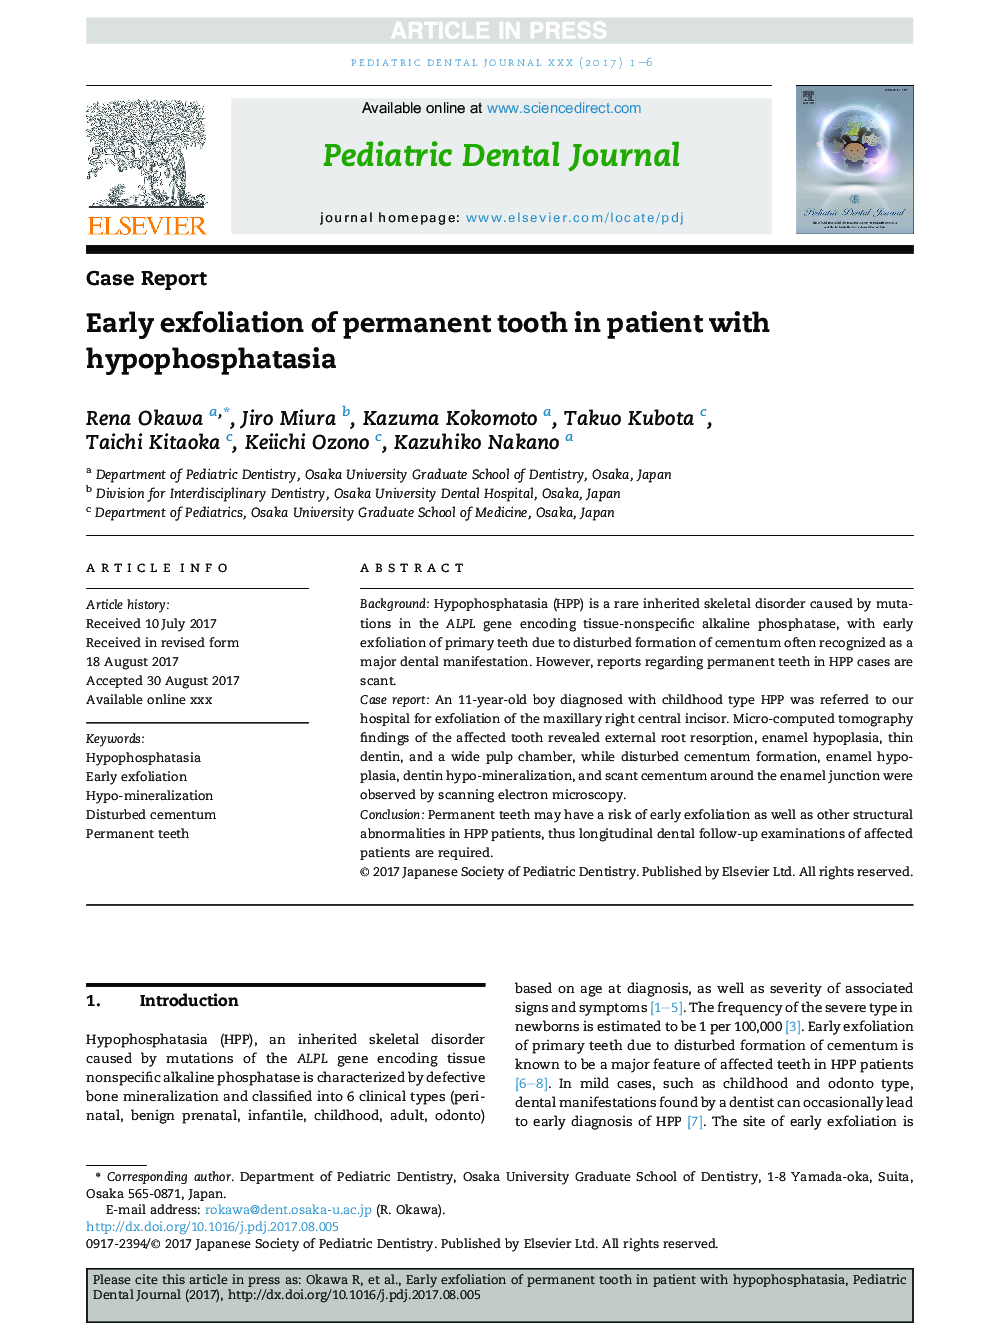 Early exfoliation of permanent tooth in patient with hypophosphatasia